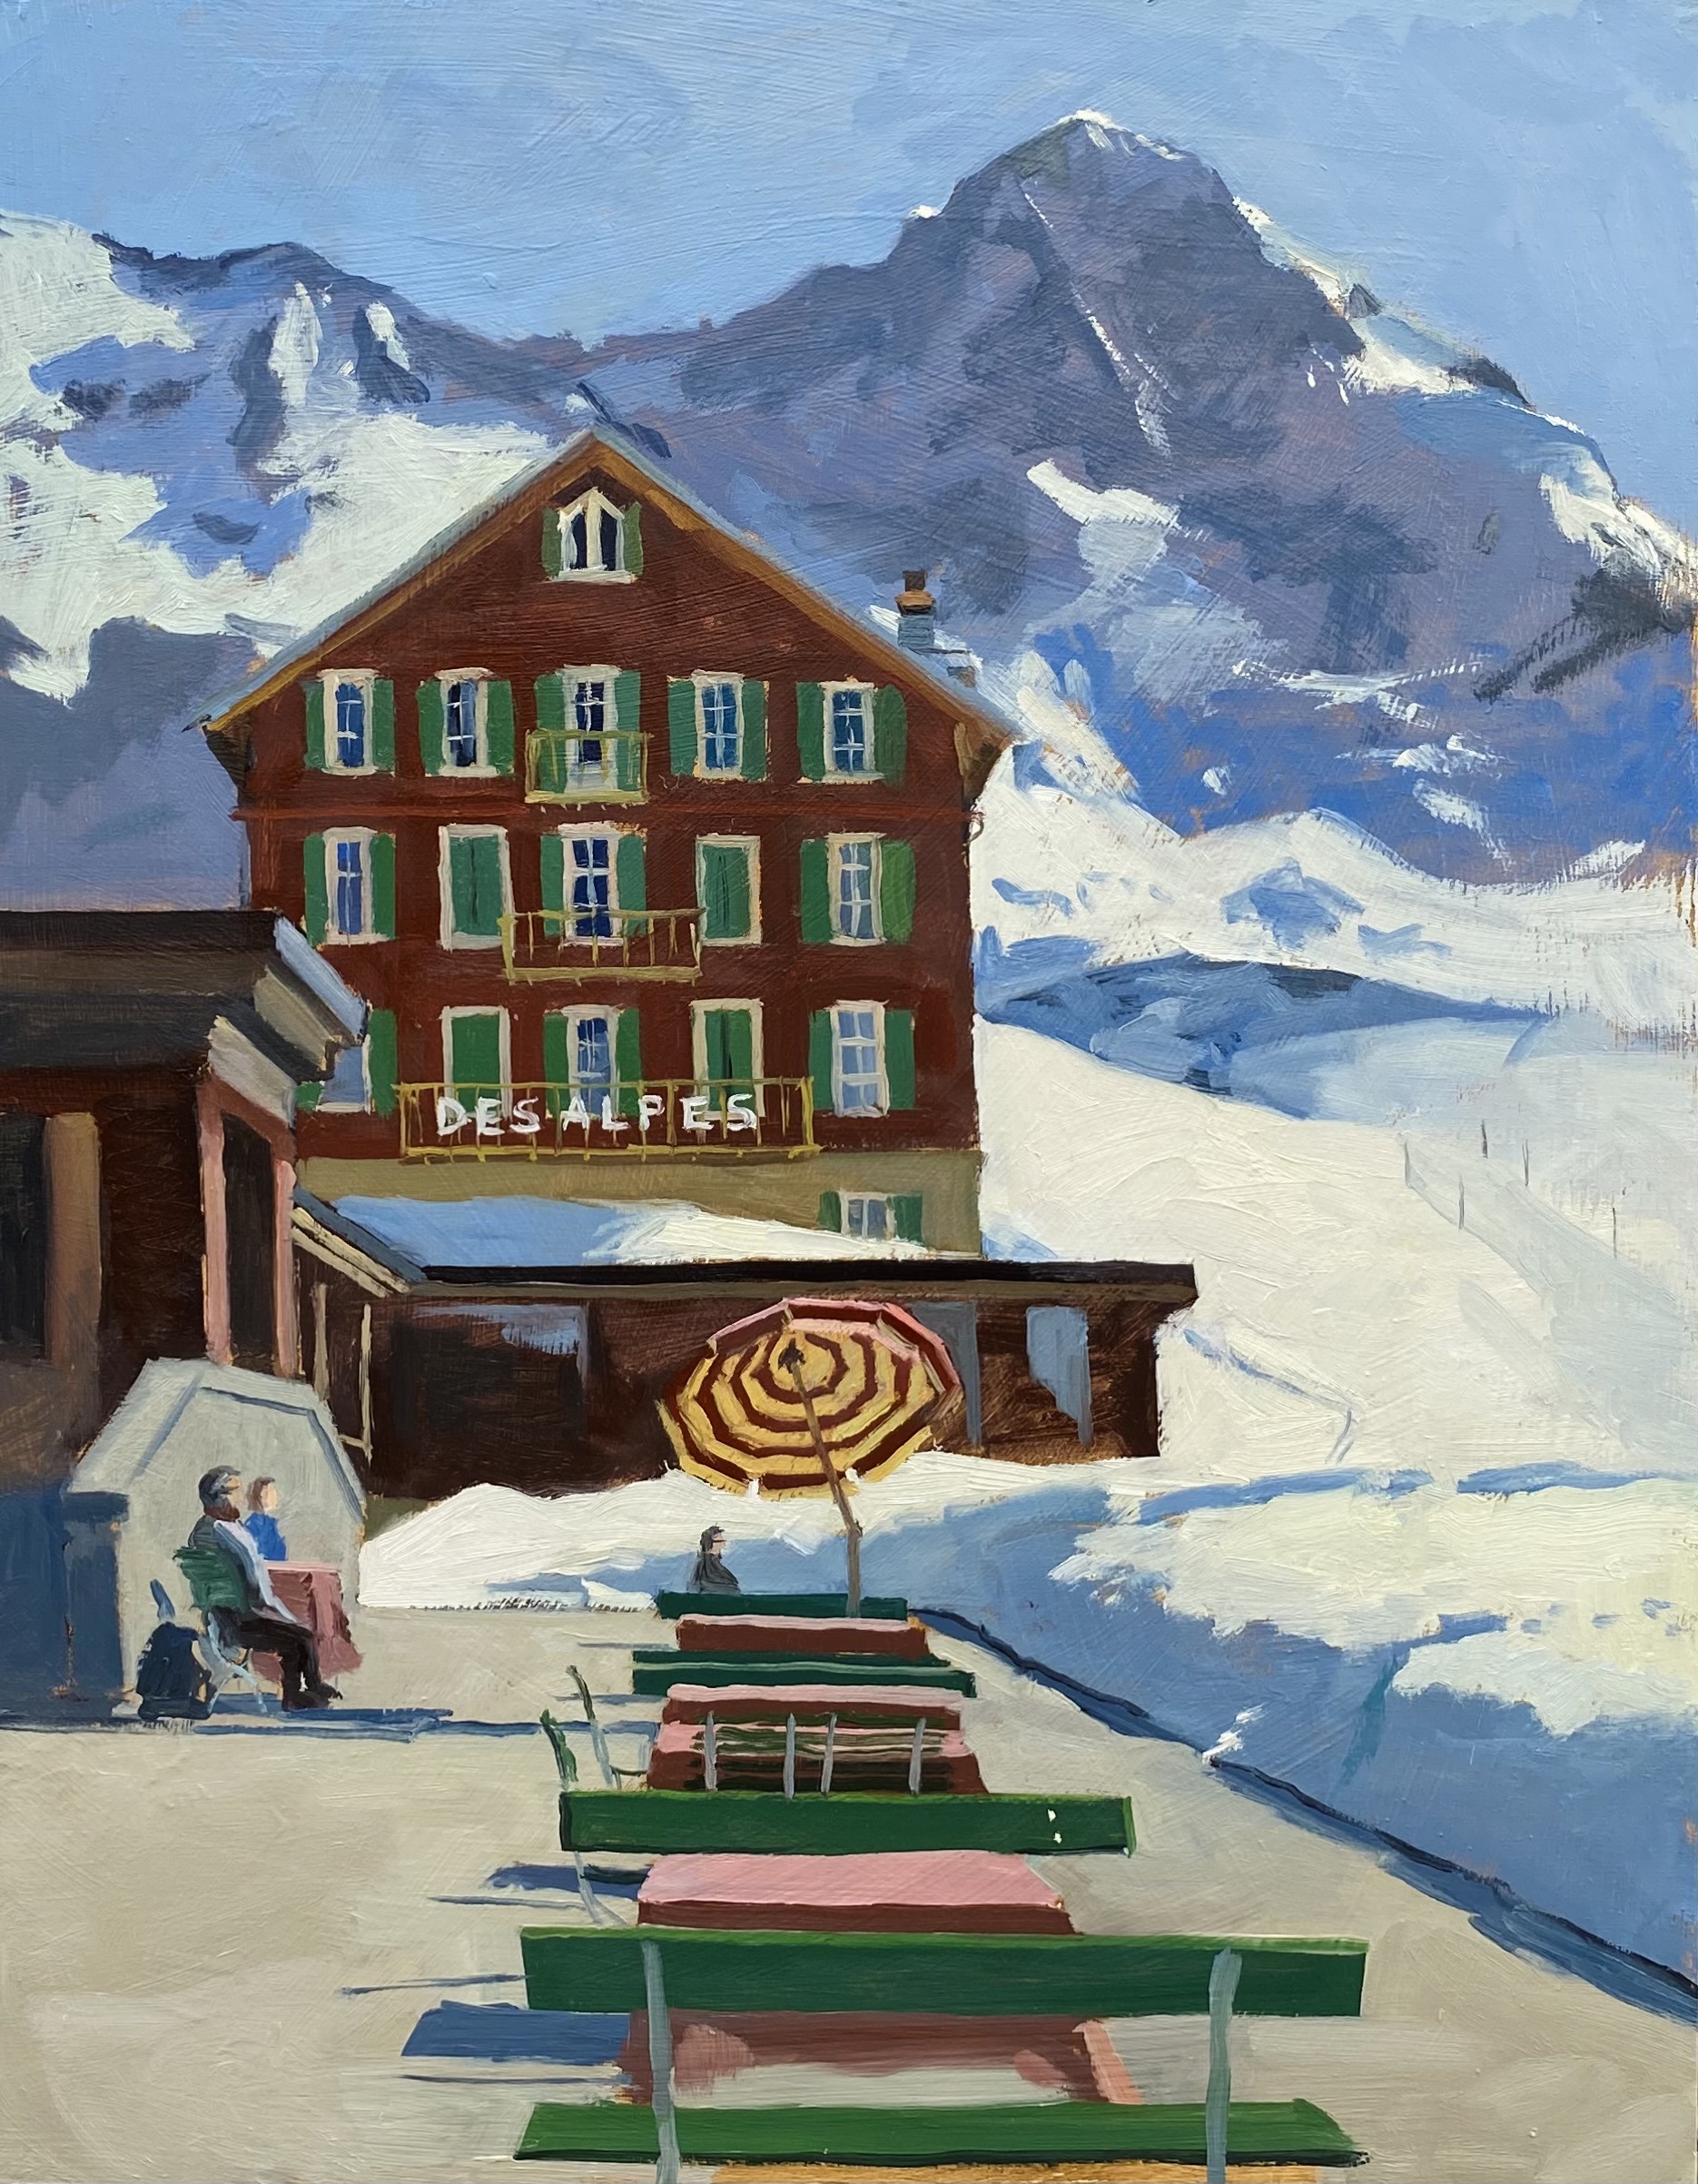 Solo Exhibition ‘From London to the Alps’ at The Portland Gallery